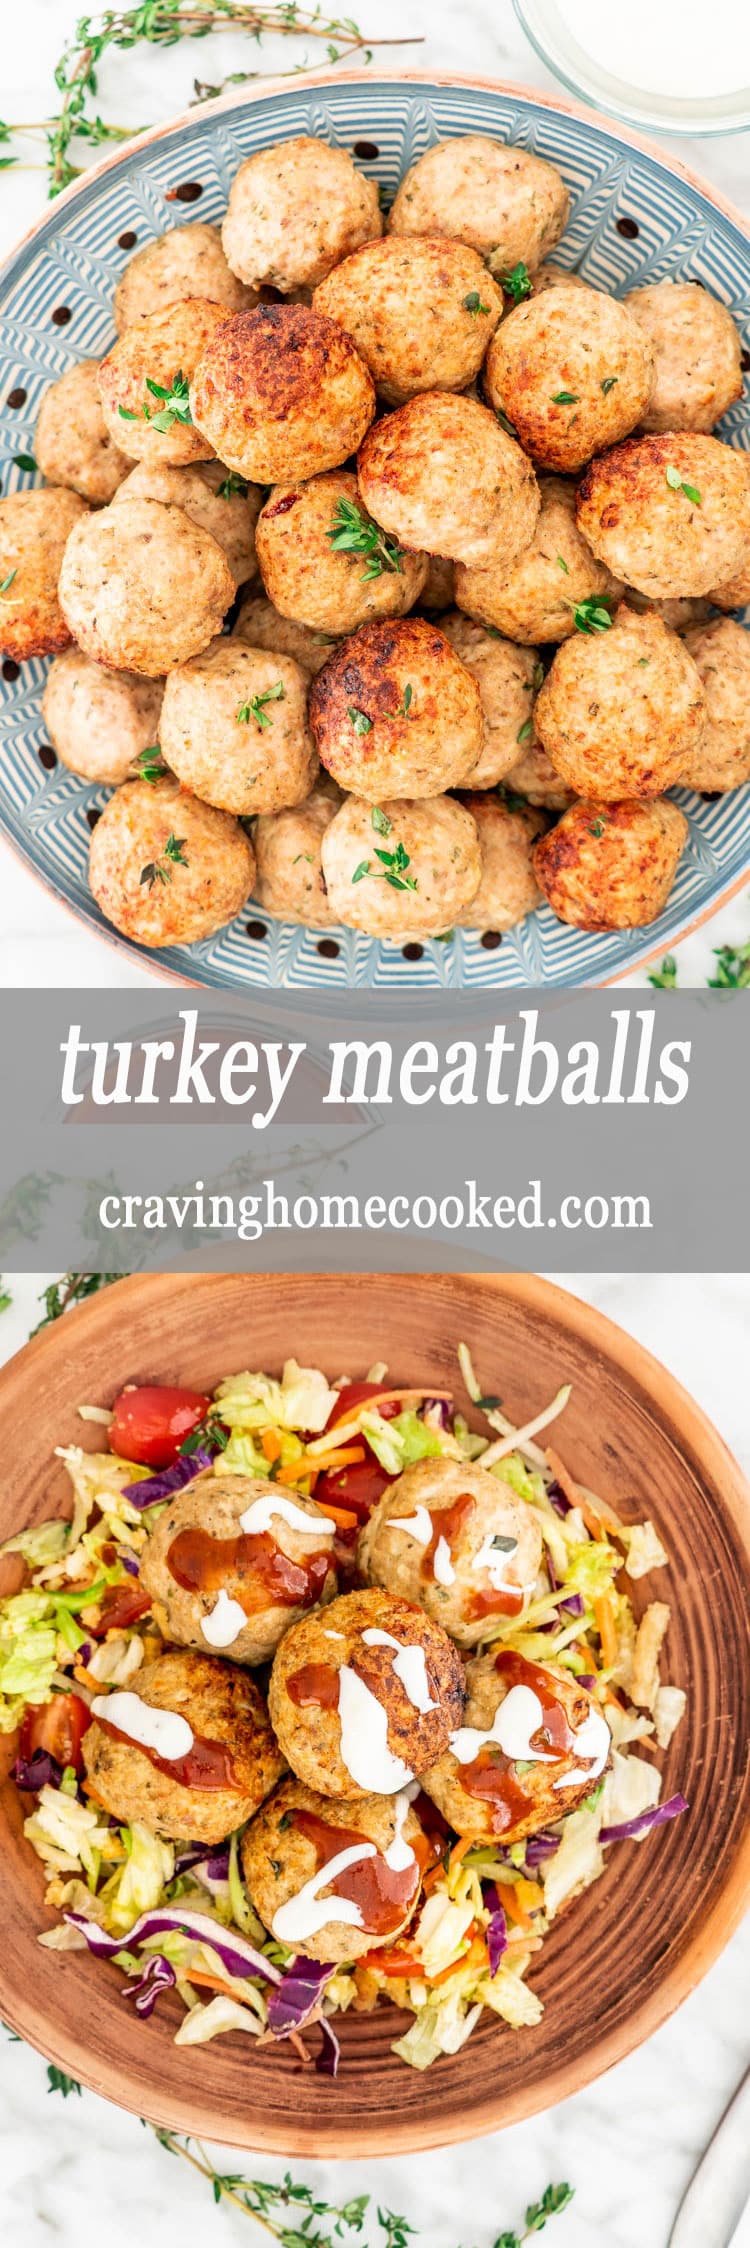 Turkey Meatballs - Craving Home Cooked